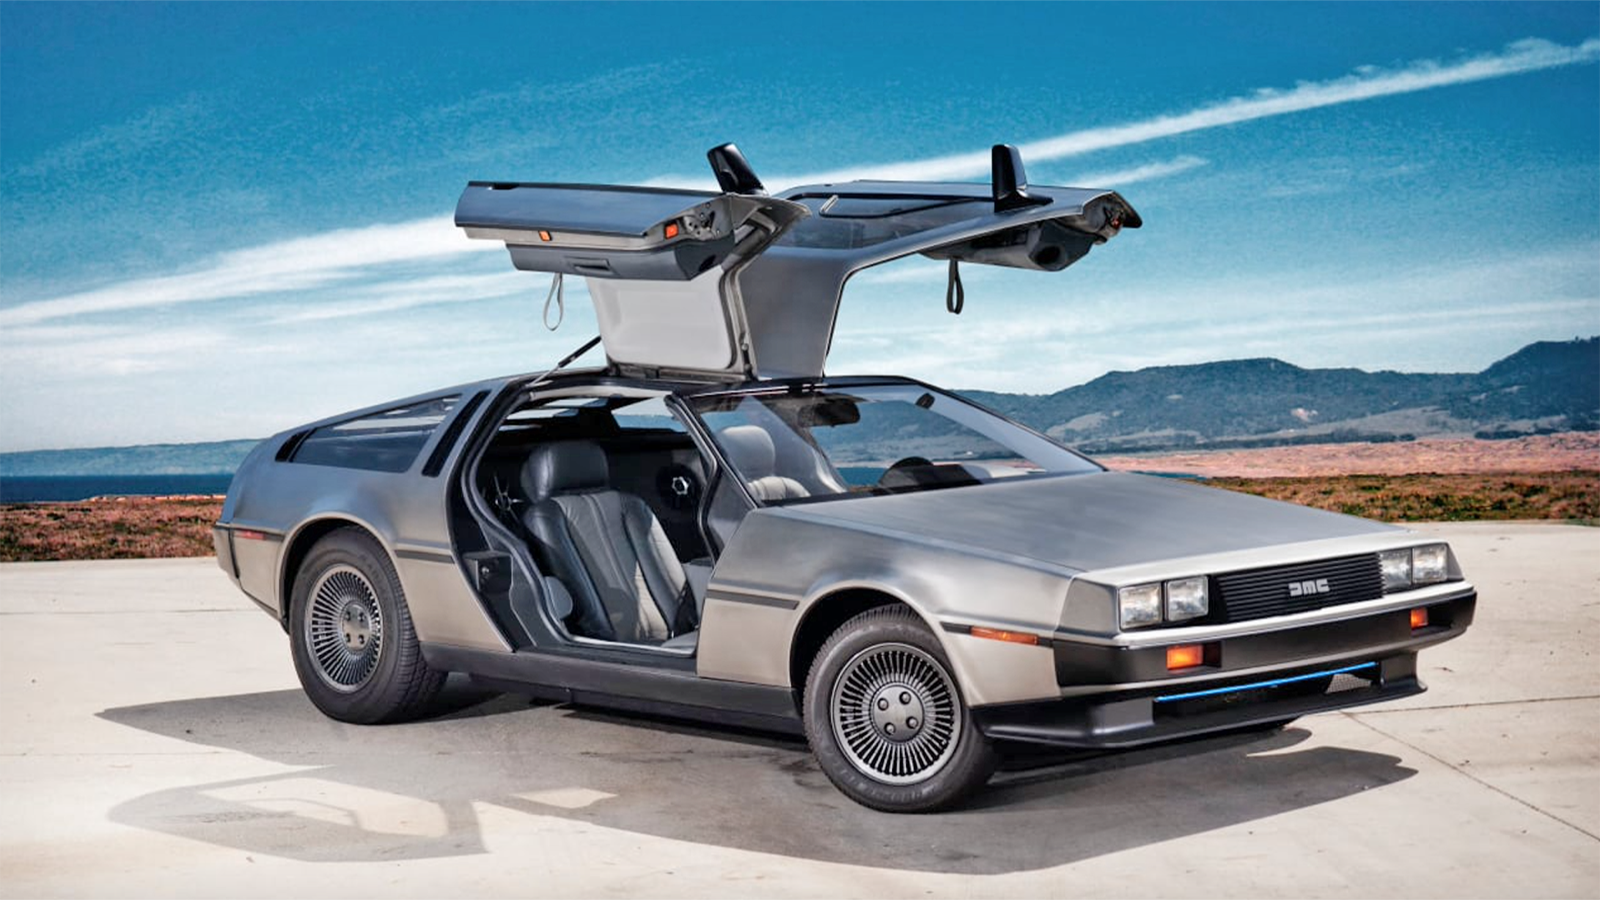 DeLorean is being revived as an EV